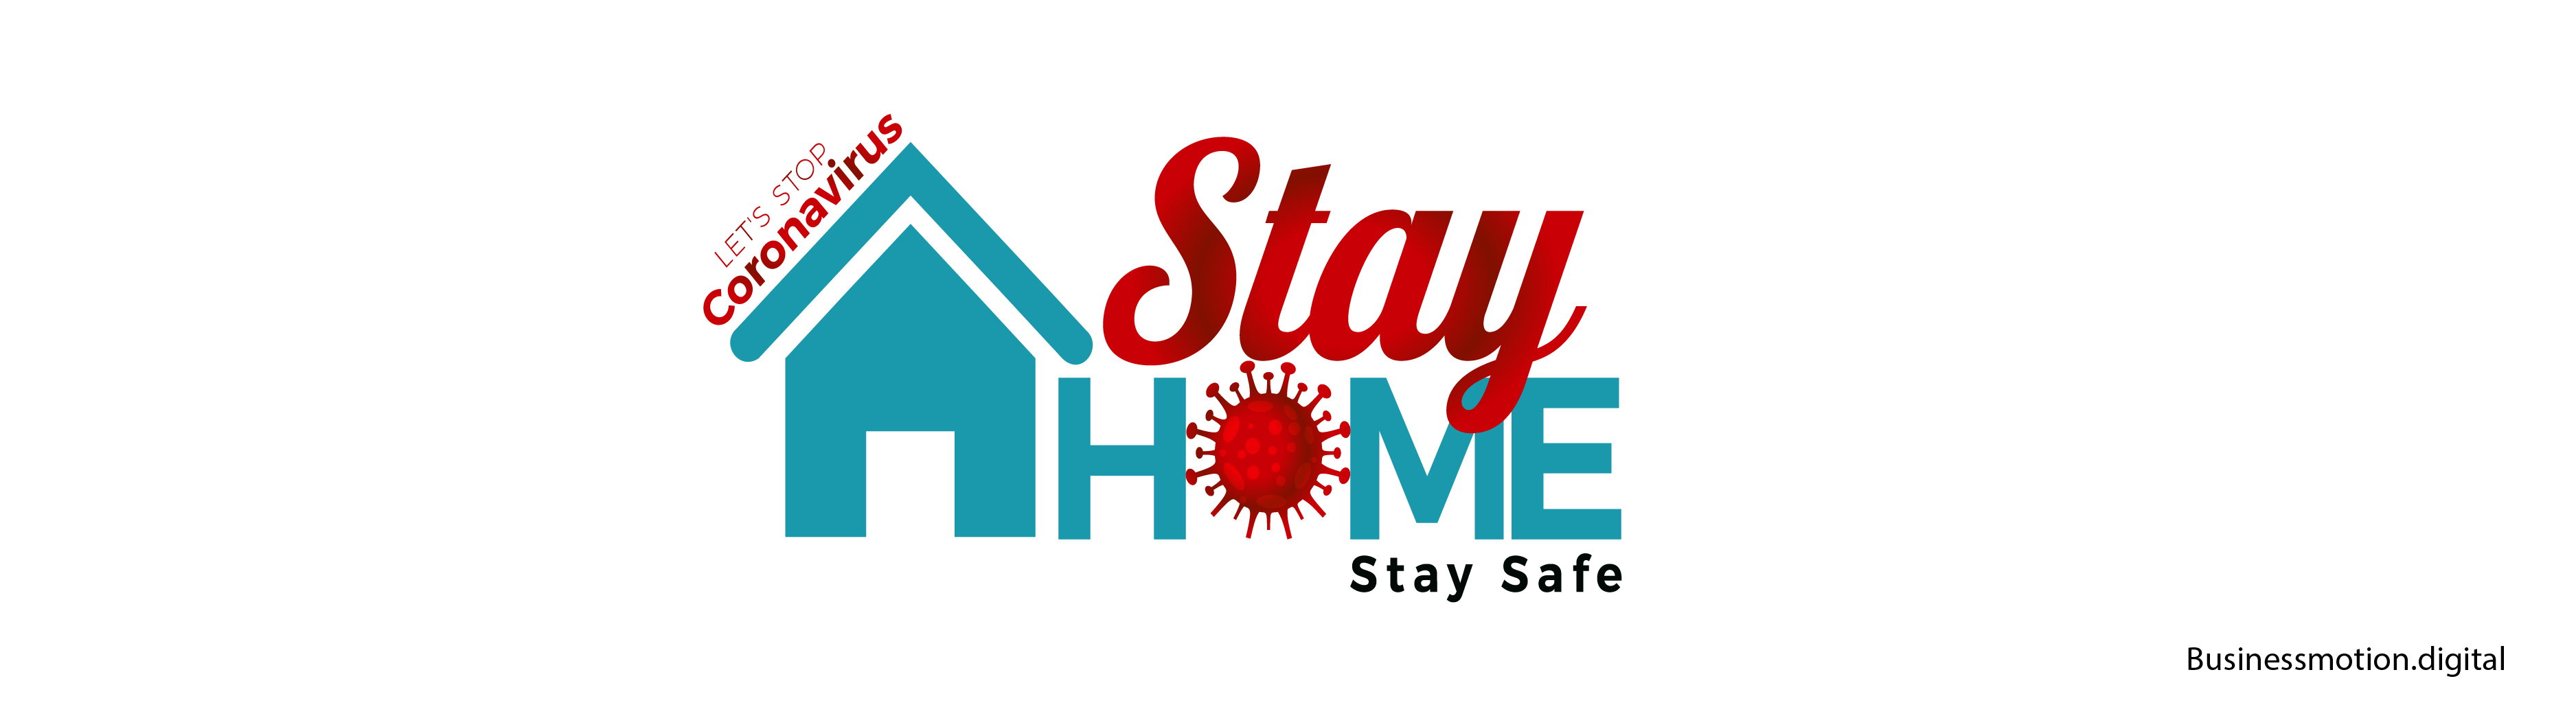 Stay Home! Stay Safe! Let's Stop Coronavirus.